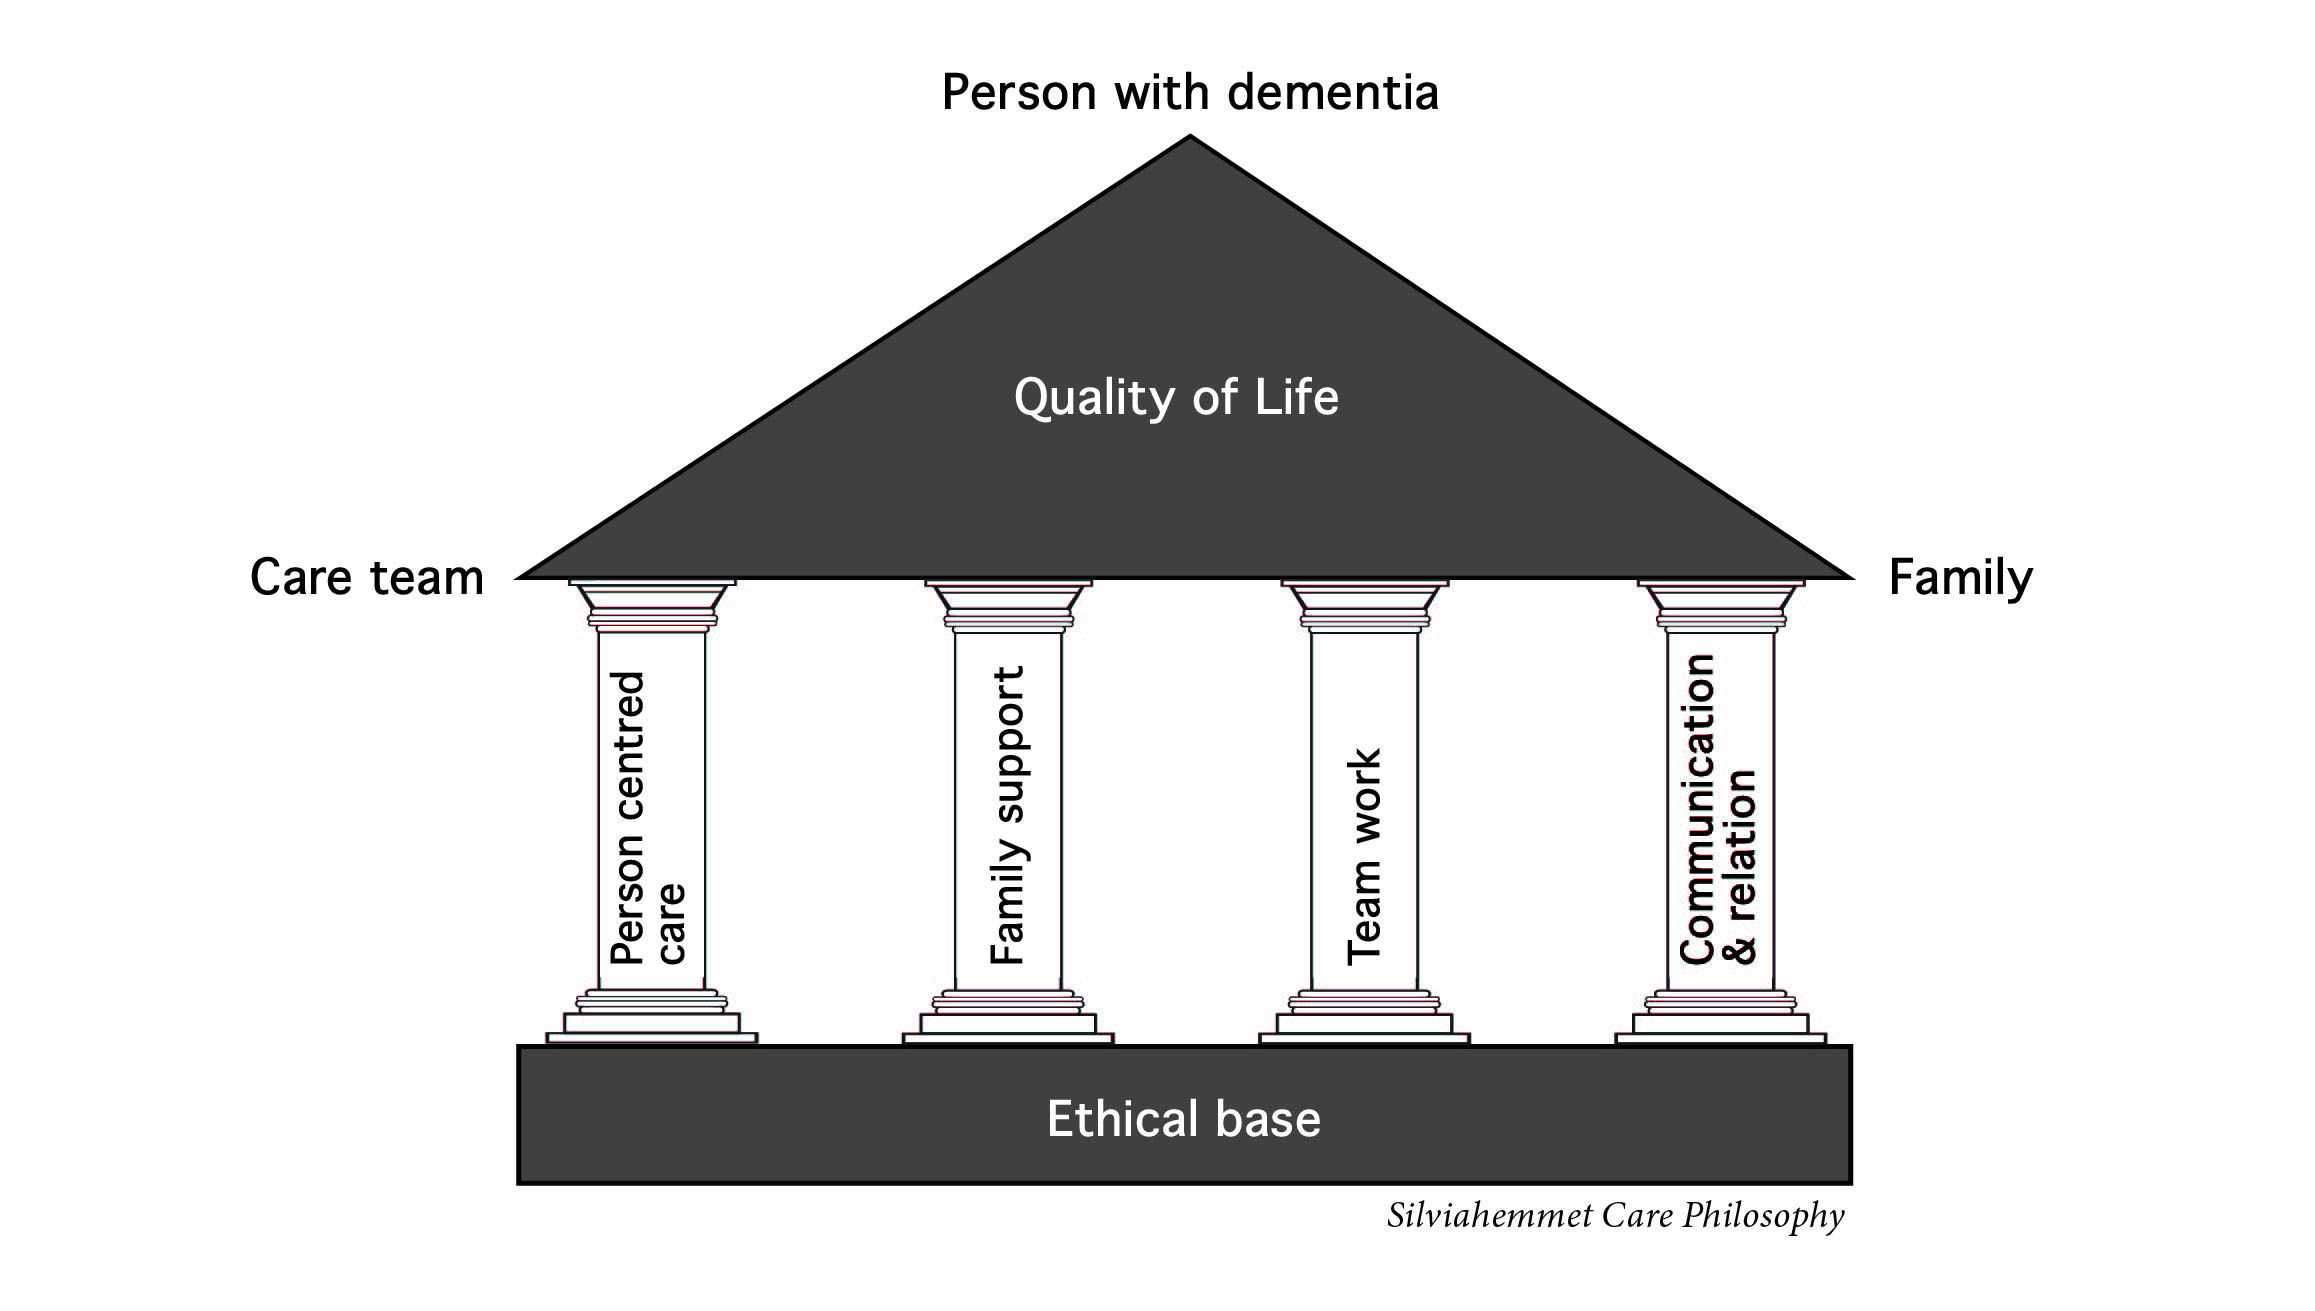 Silviahemmet Care Philosophy; Quality of Life, person with dementia, Ethical base, Care team, Family, Personcentered care, Family support, Team work, Communication & relation